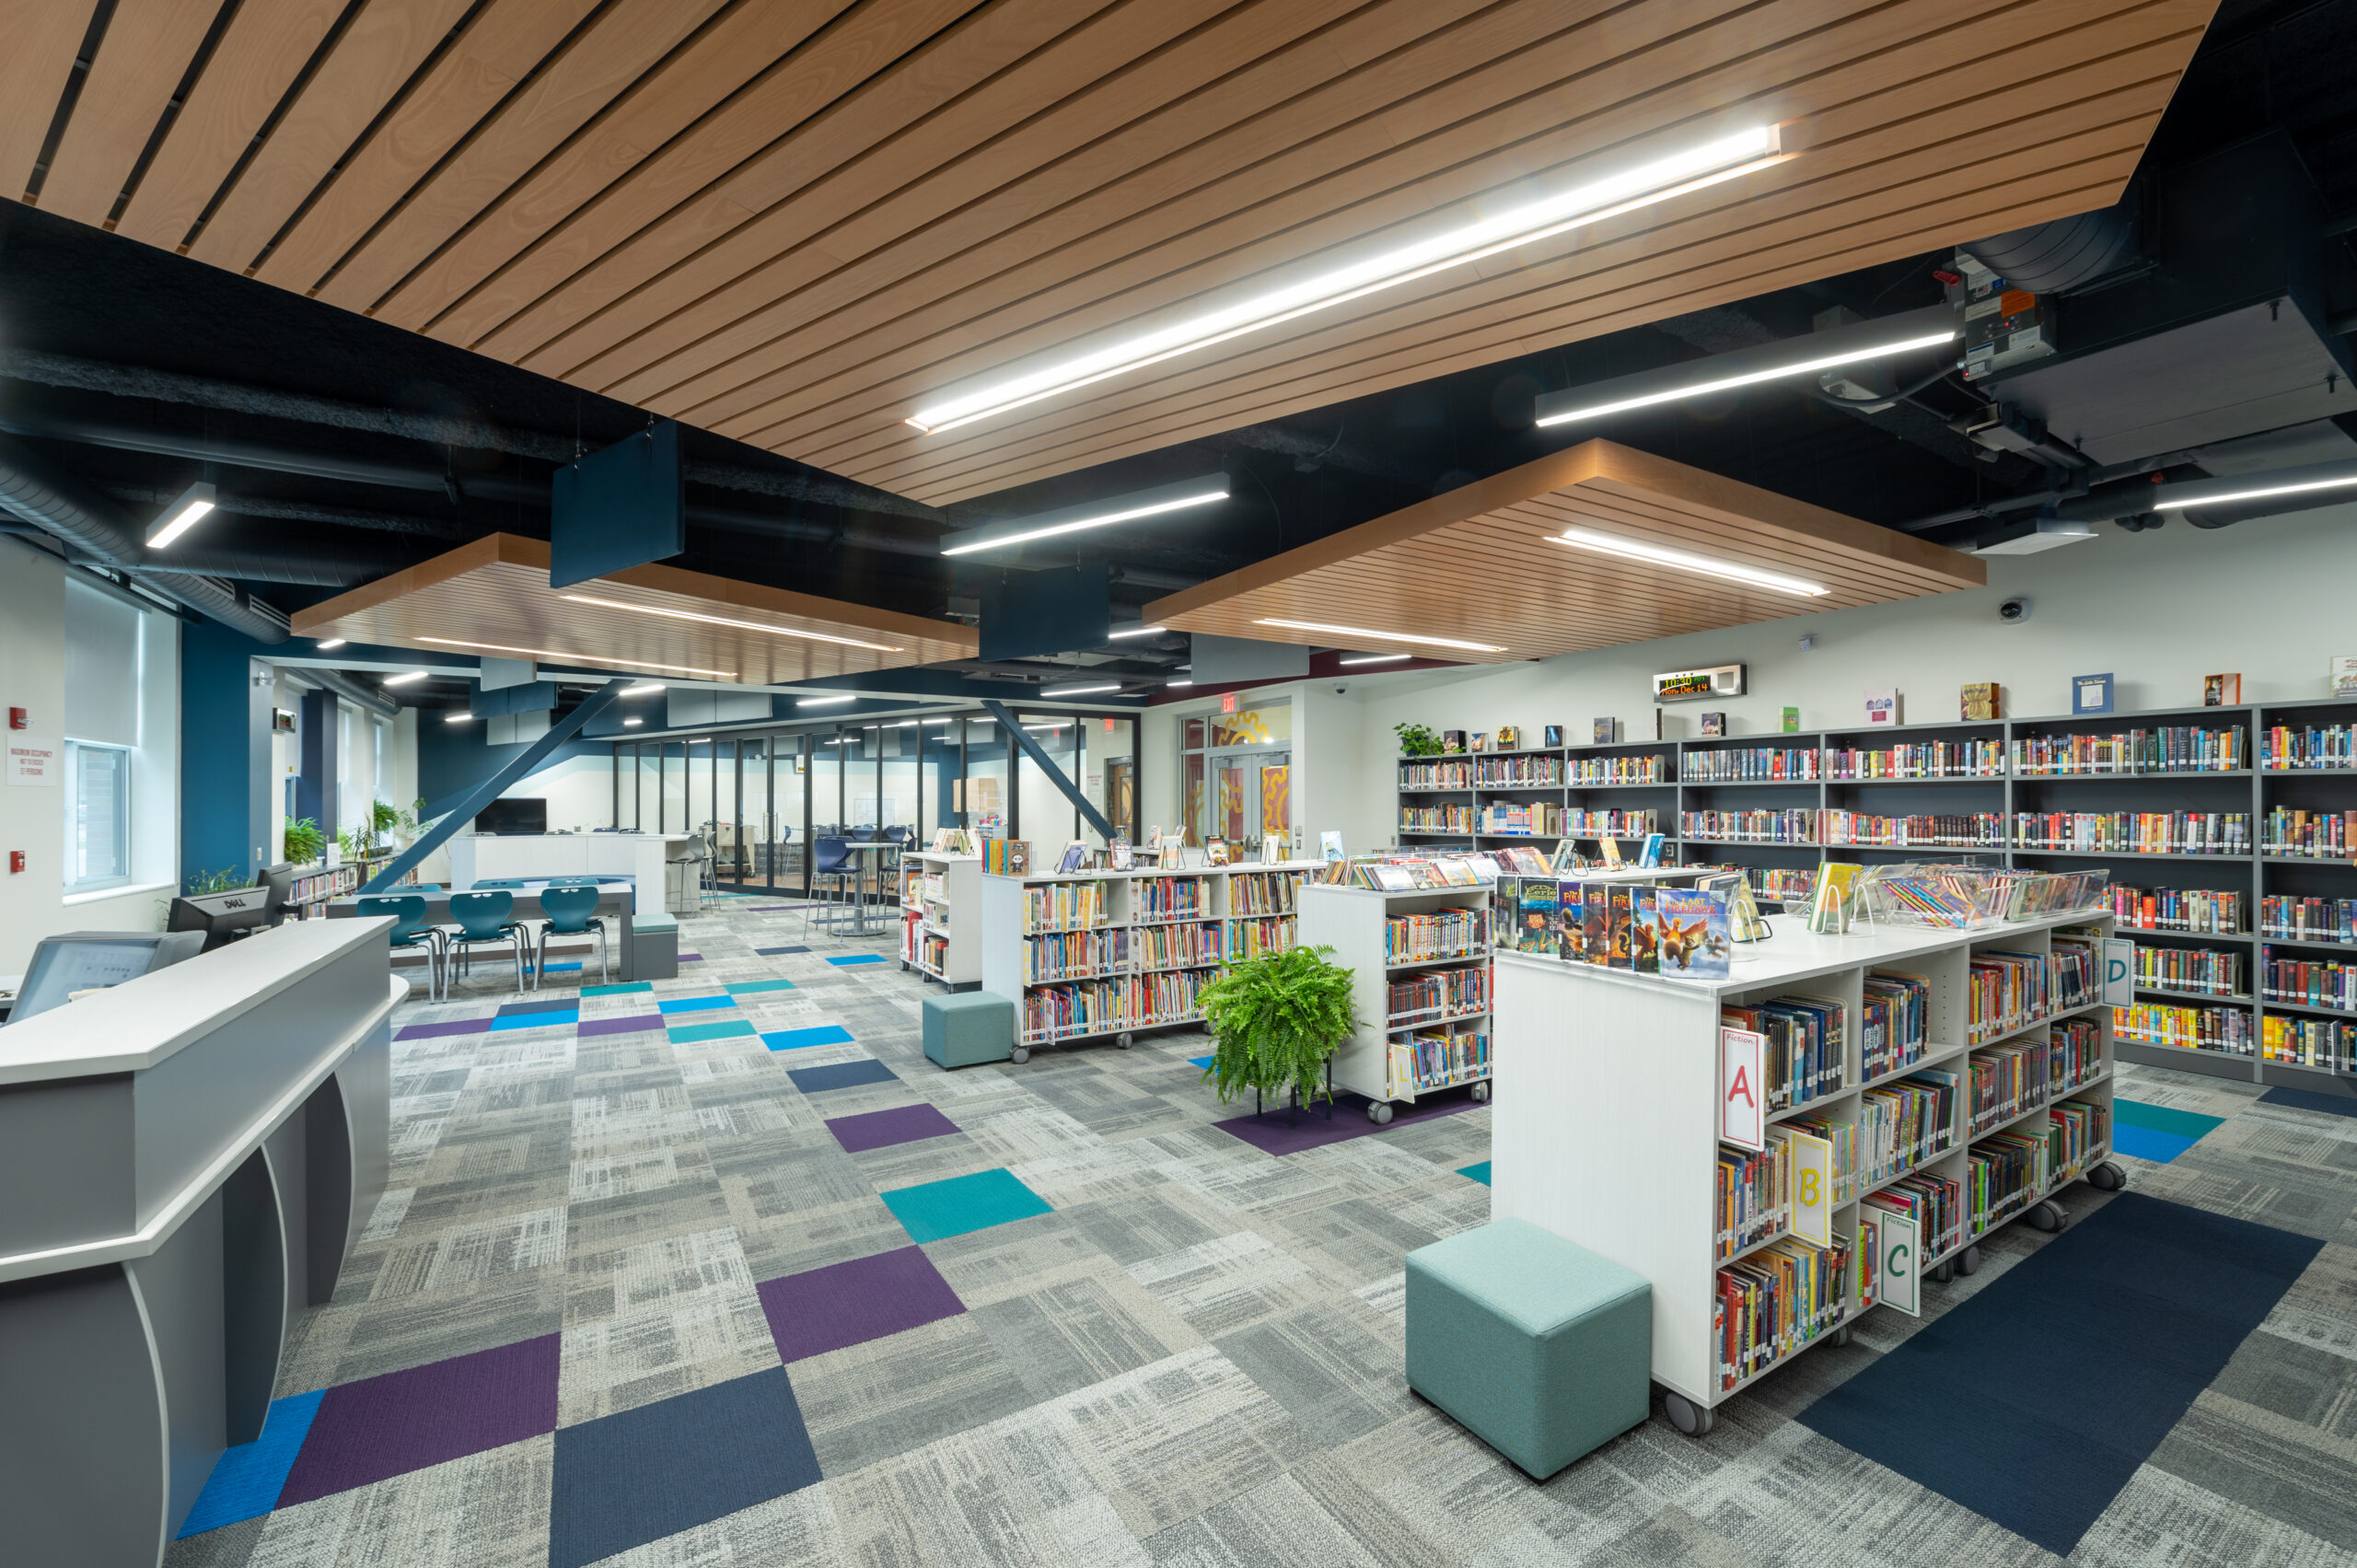 The media center at Avoca CSD is shown. The floor has colorful carpet that is gray with turquiose, purple, and navy elements. There are book shelves and places to sit. 